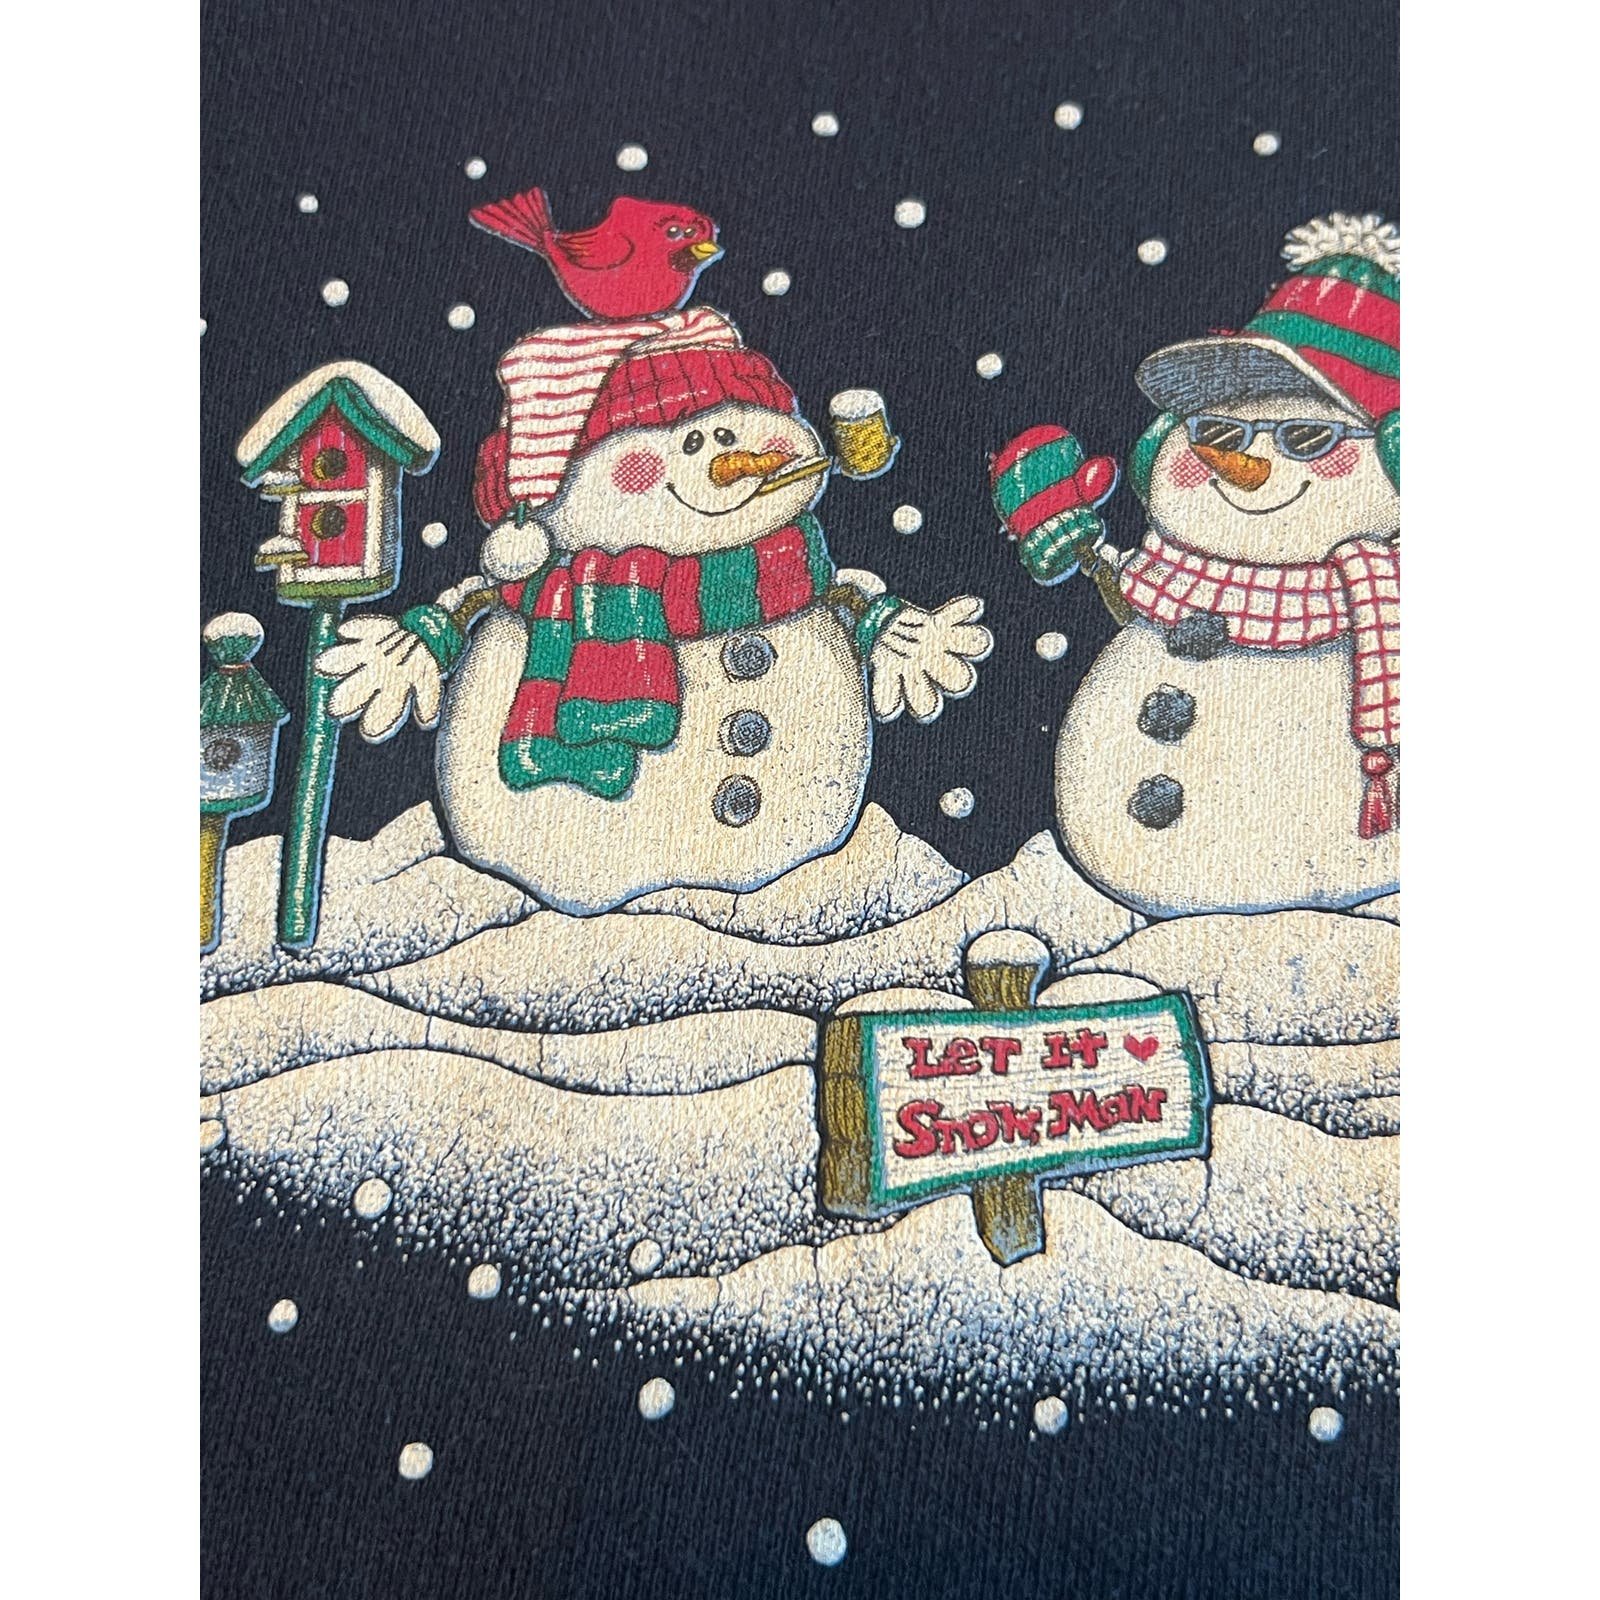 Amazing Vintage 90s Holiday Christmas Sweater - Snowmen Jbwy89Gto hot sale